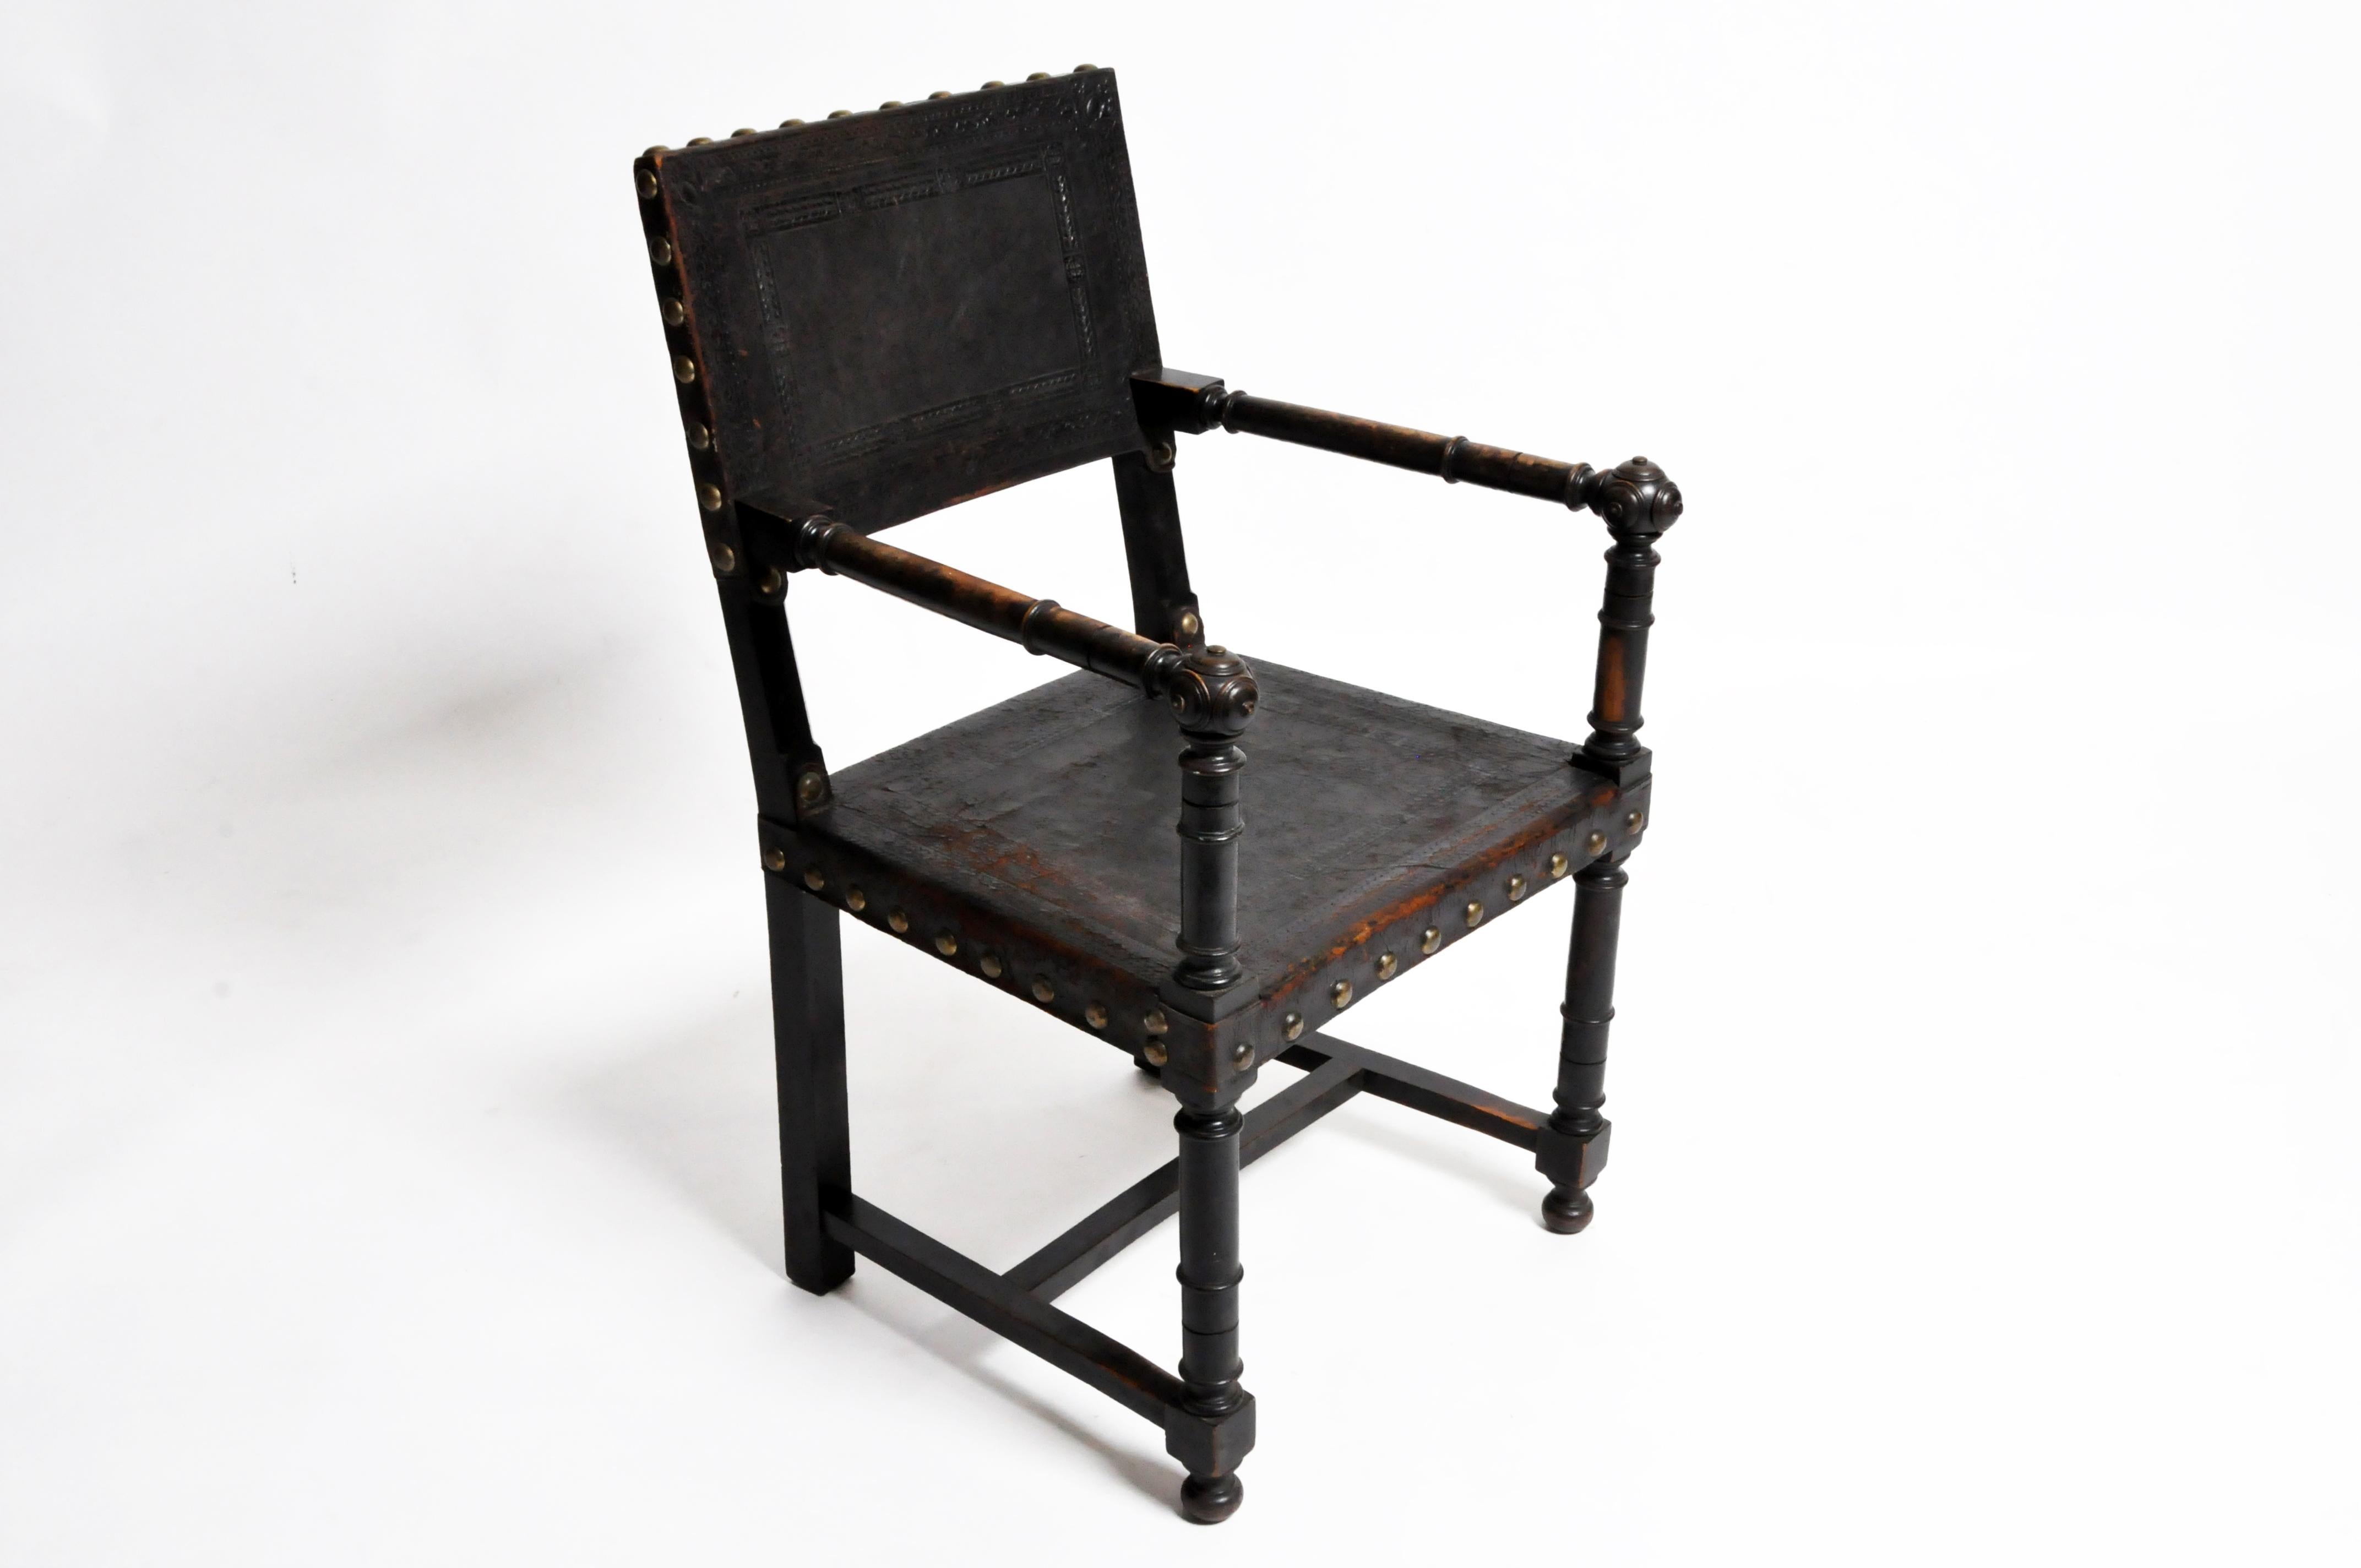 This armchair is from France and is made from black leather and wood, circa 1900. The chair features a beautifully aged patina and is made in a Gothic Revival style.